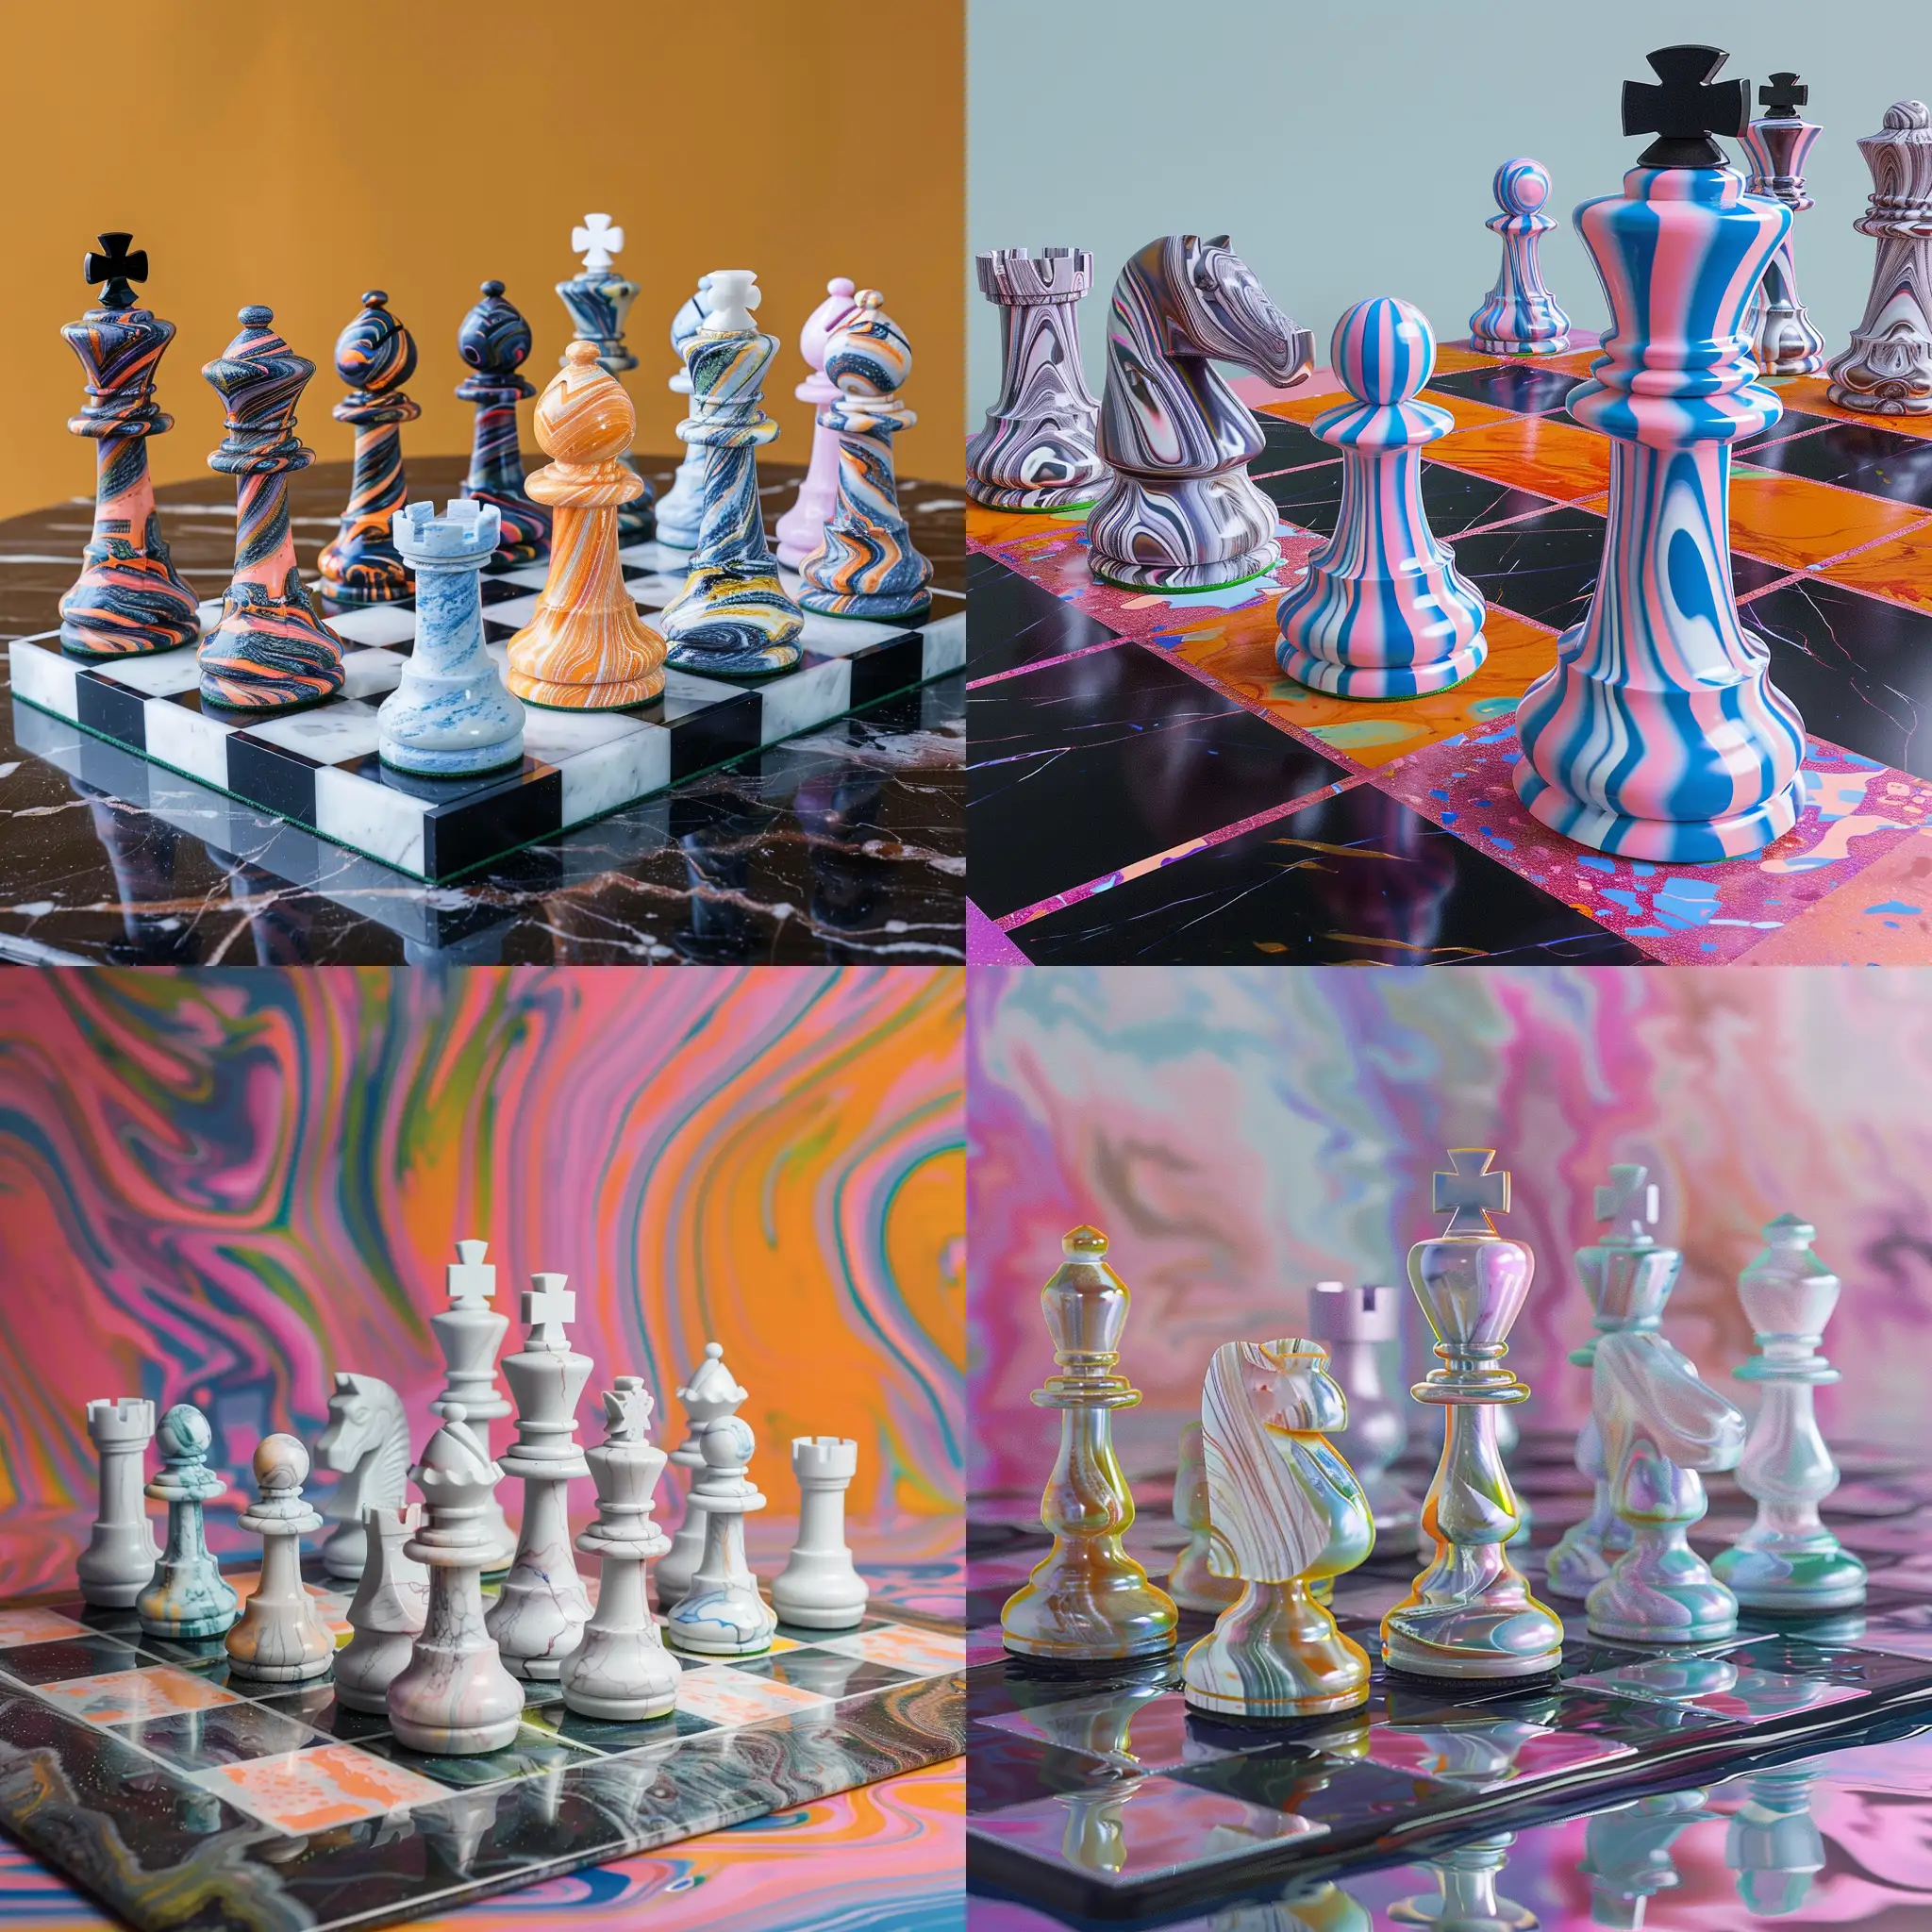 Futuristic-Marble-Chessboard-with-Bright-Colors